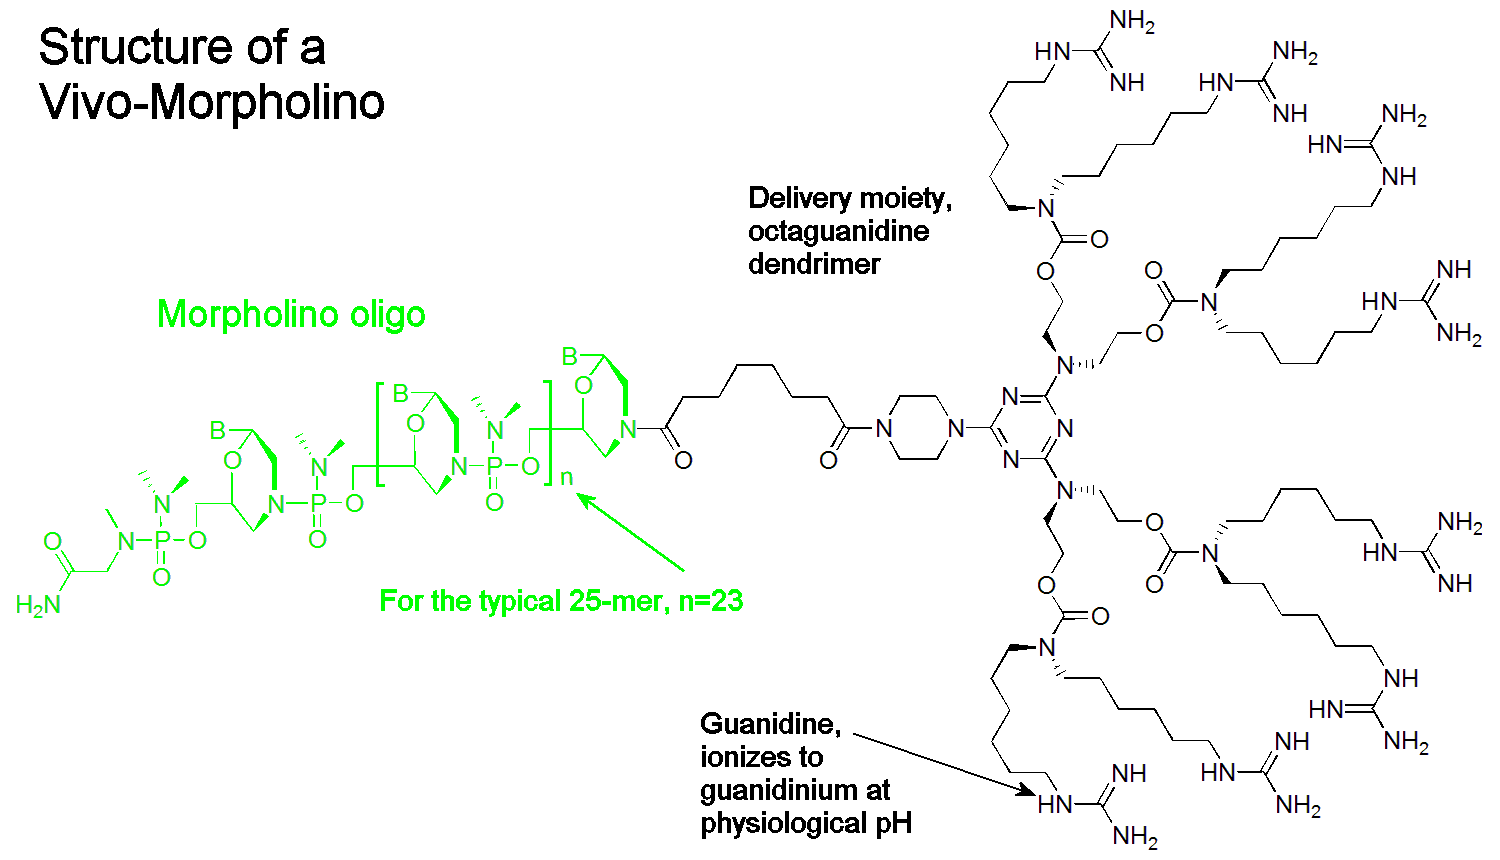 Structure of Morpholino with octaguanidinium dendrimer